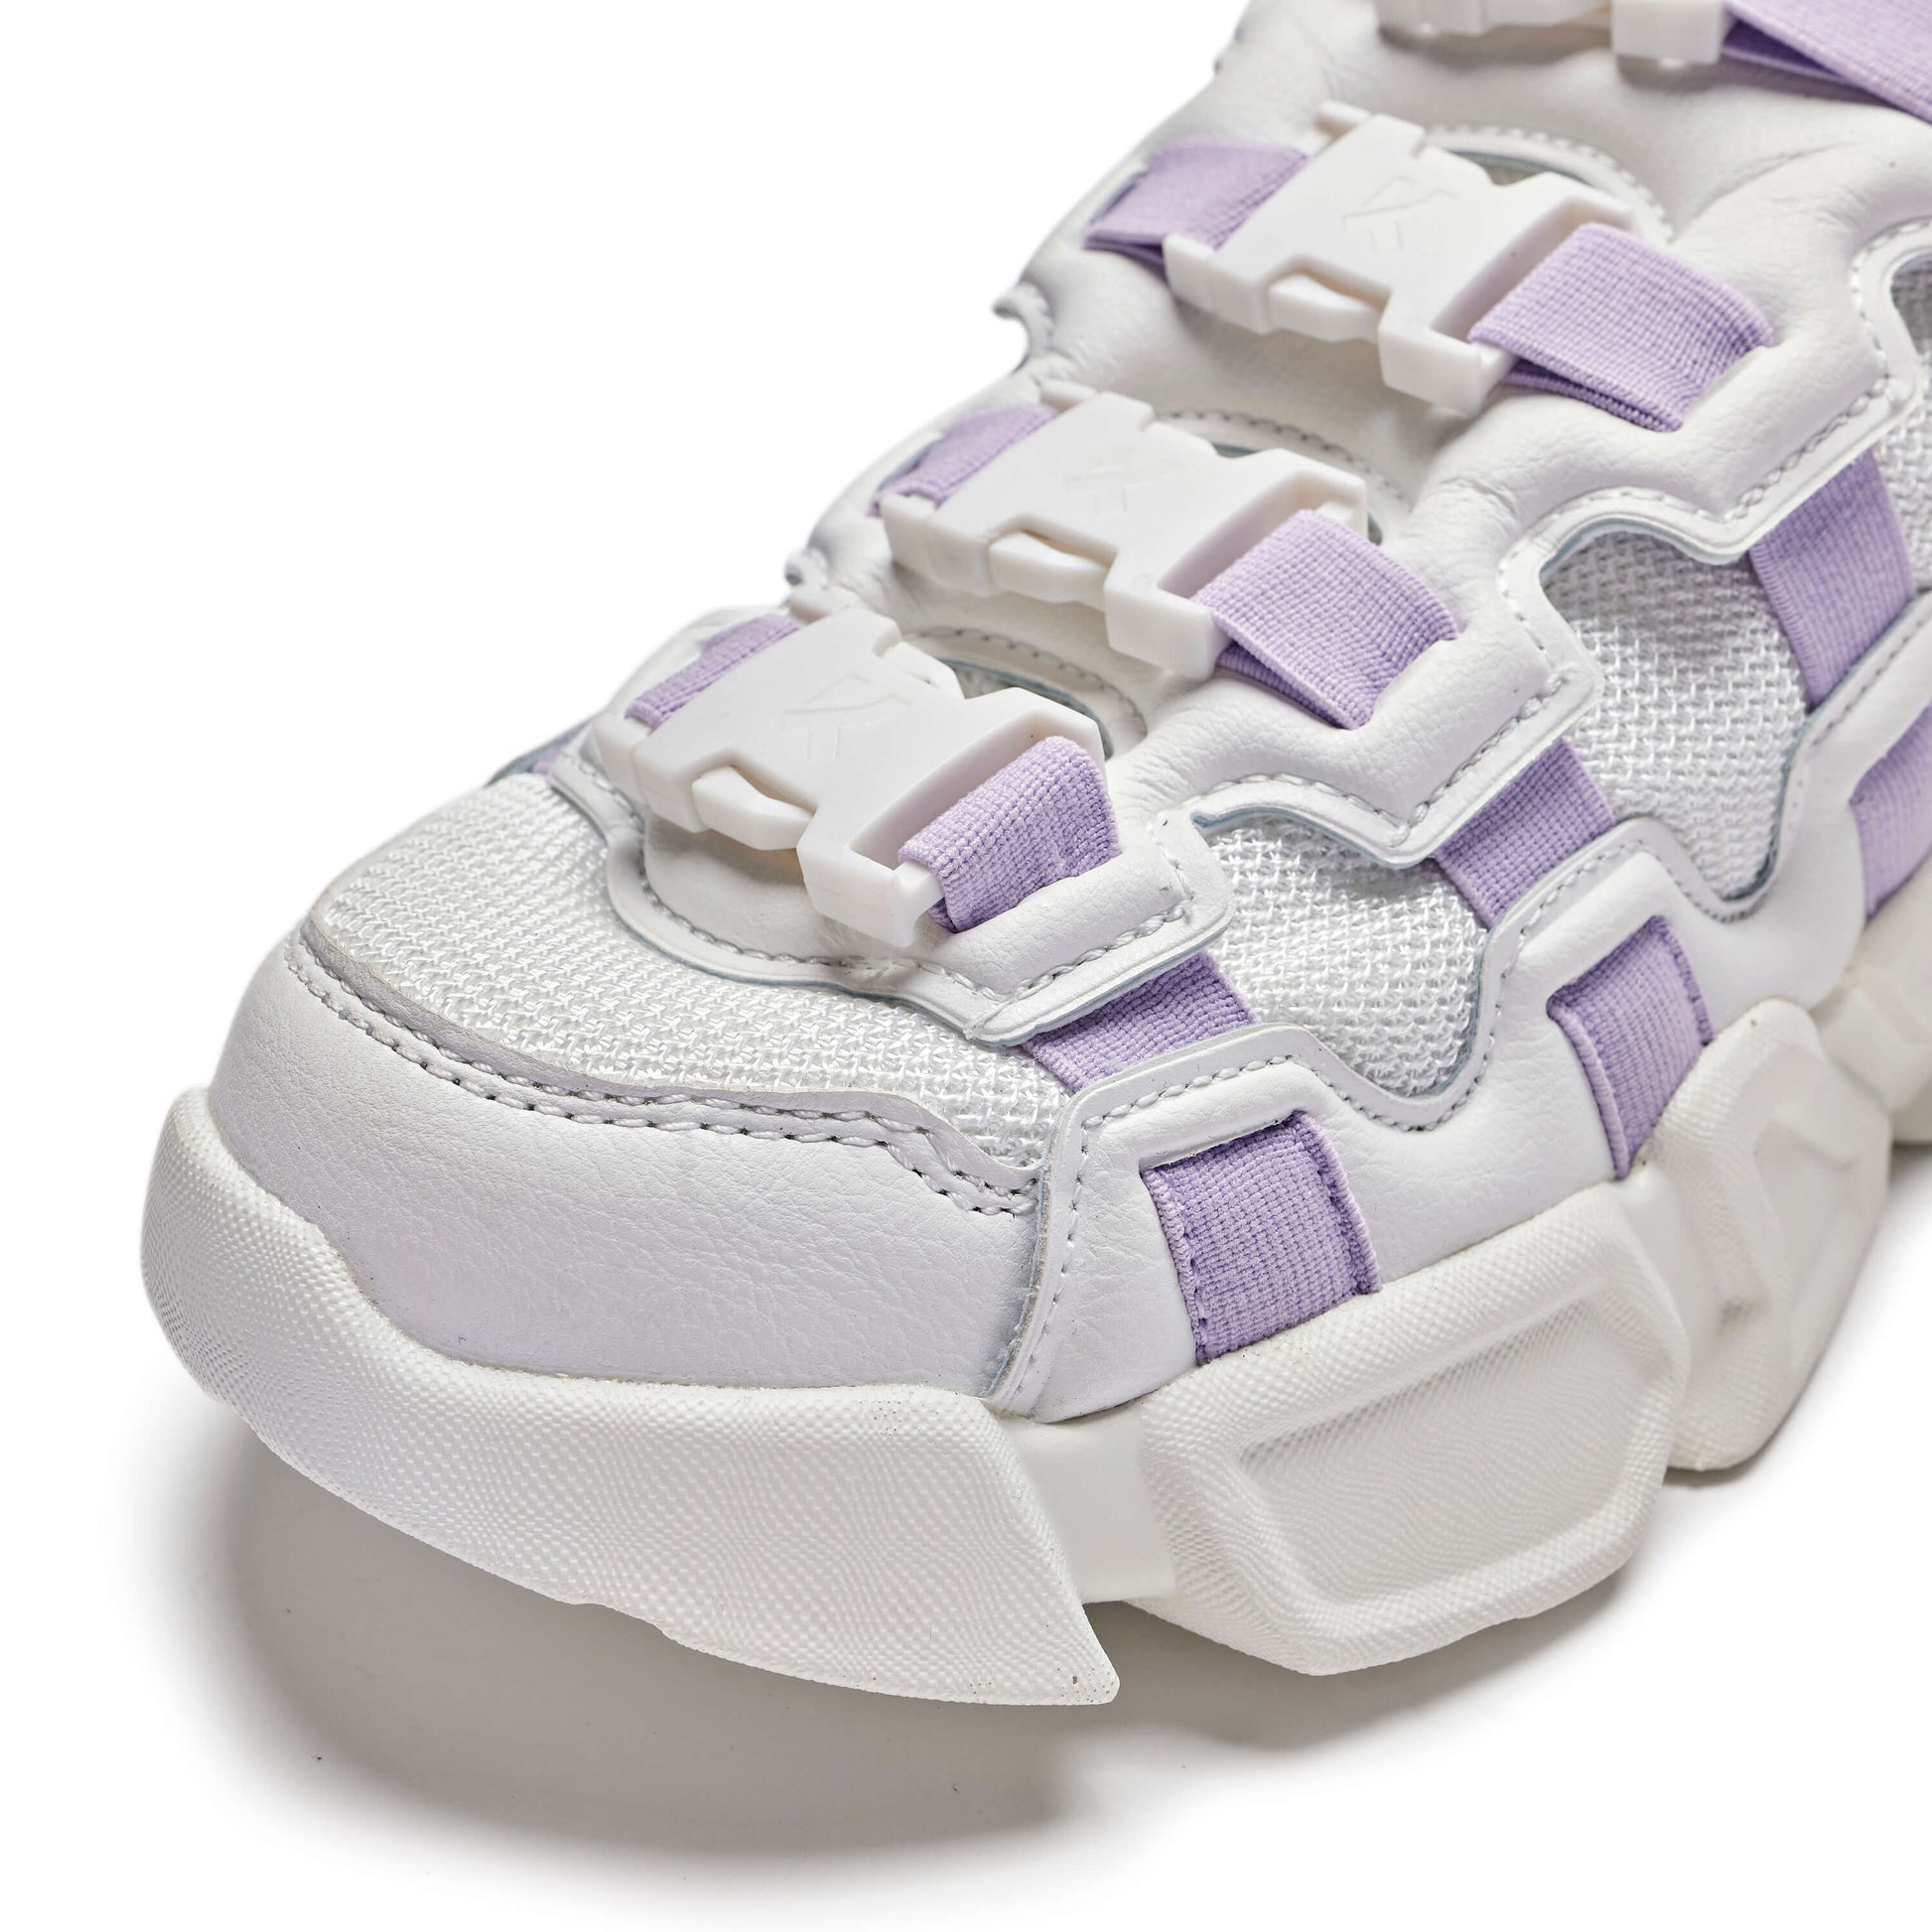 Lavender Sugar Beast Trainers - Trainers - KOI Footwear - White - Front Detail